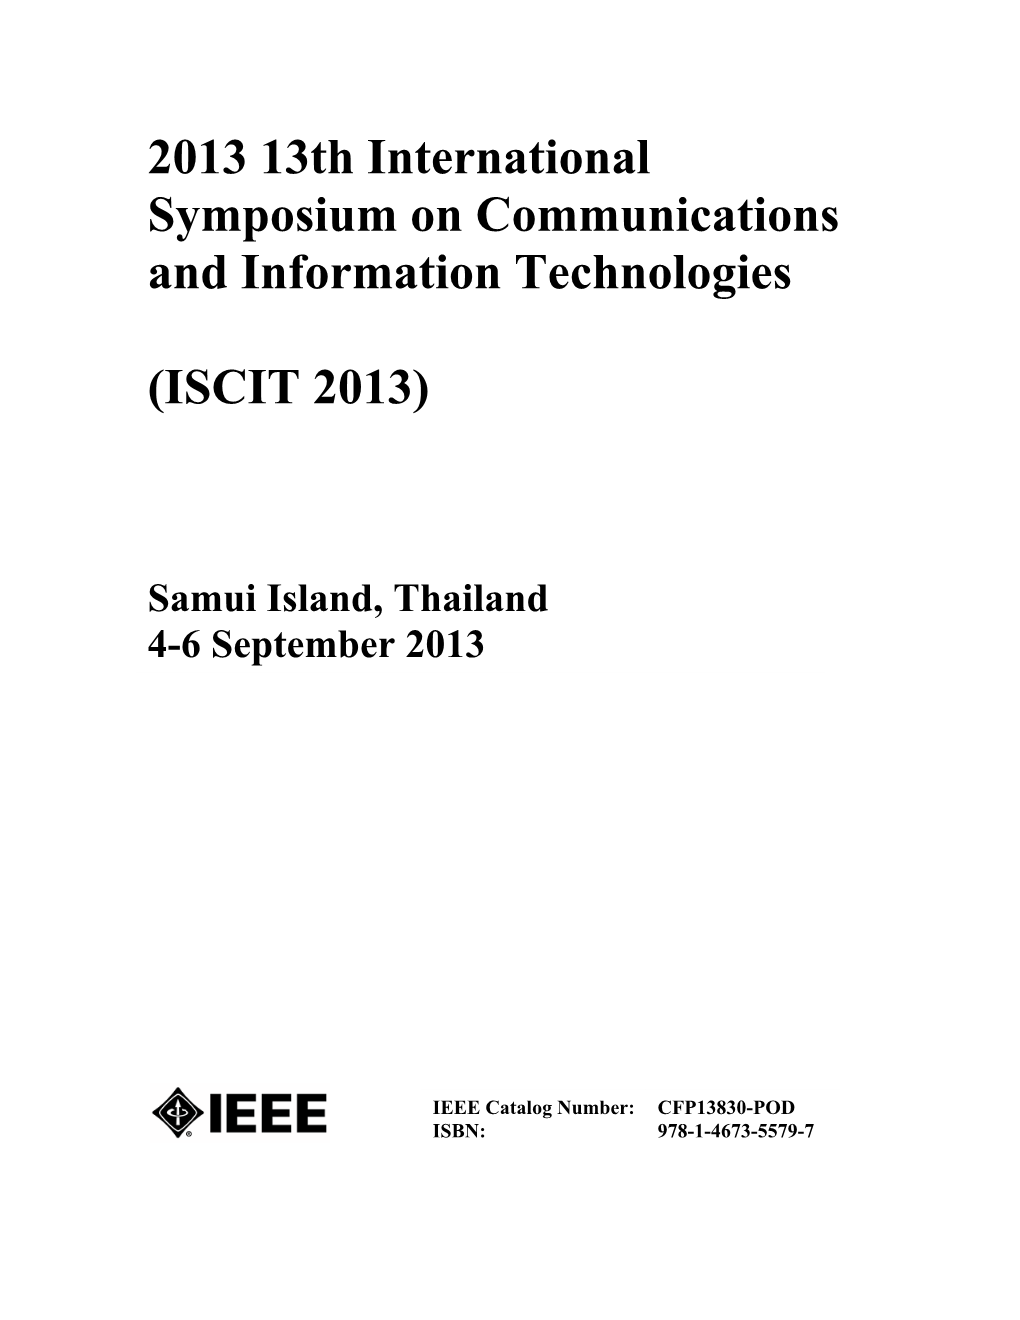 2013 13Th International Symposium on Communications and Information Technologies